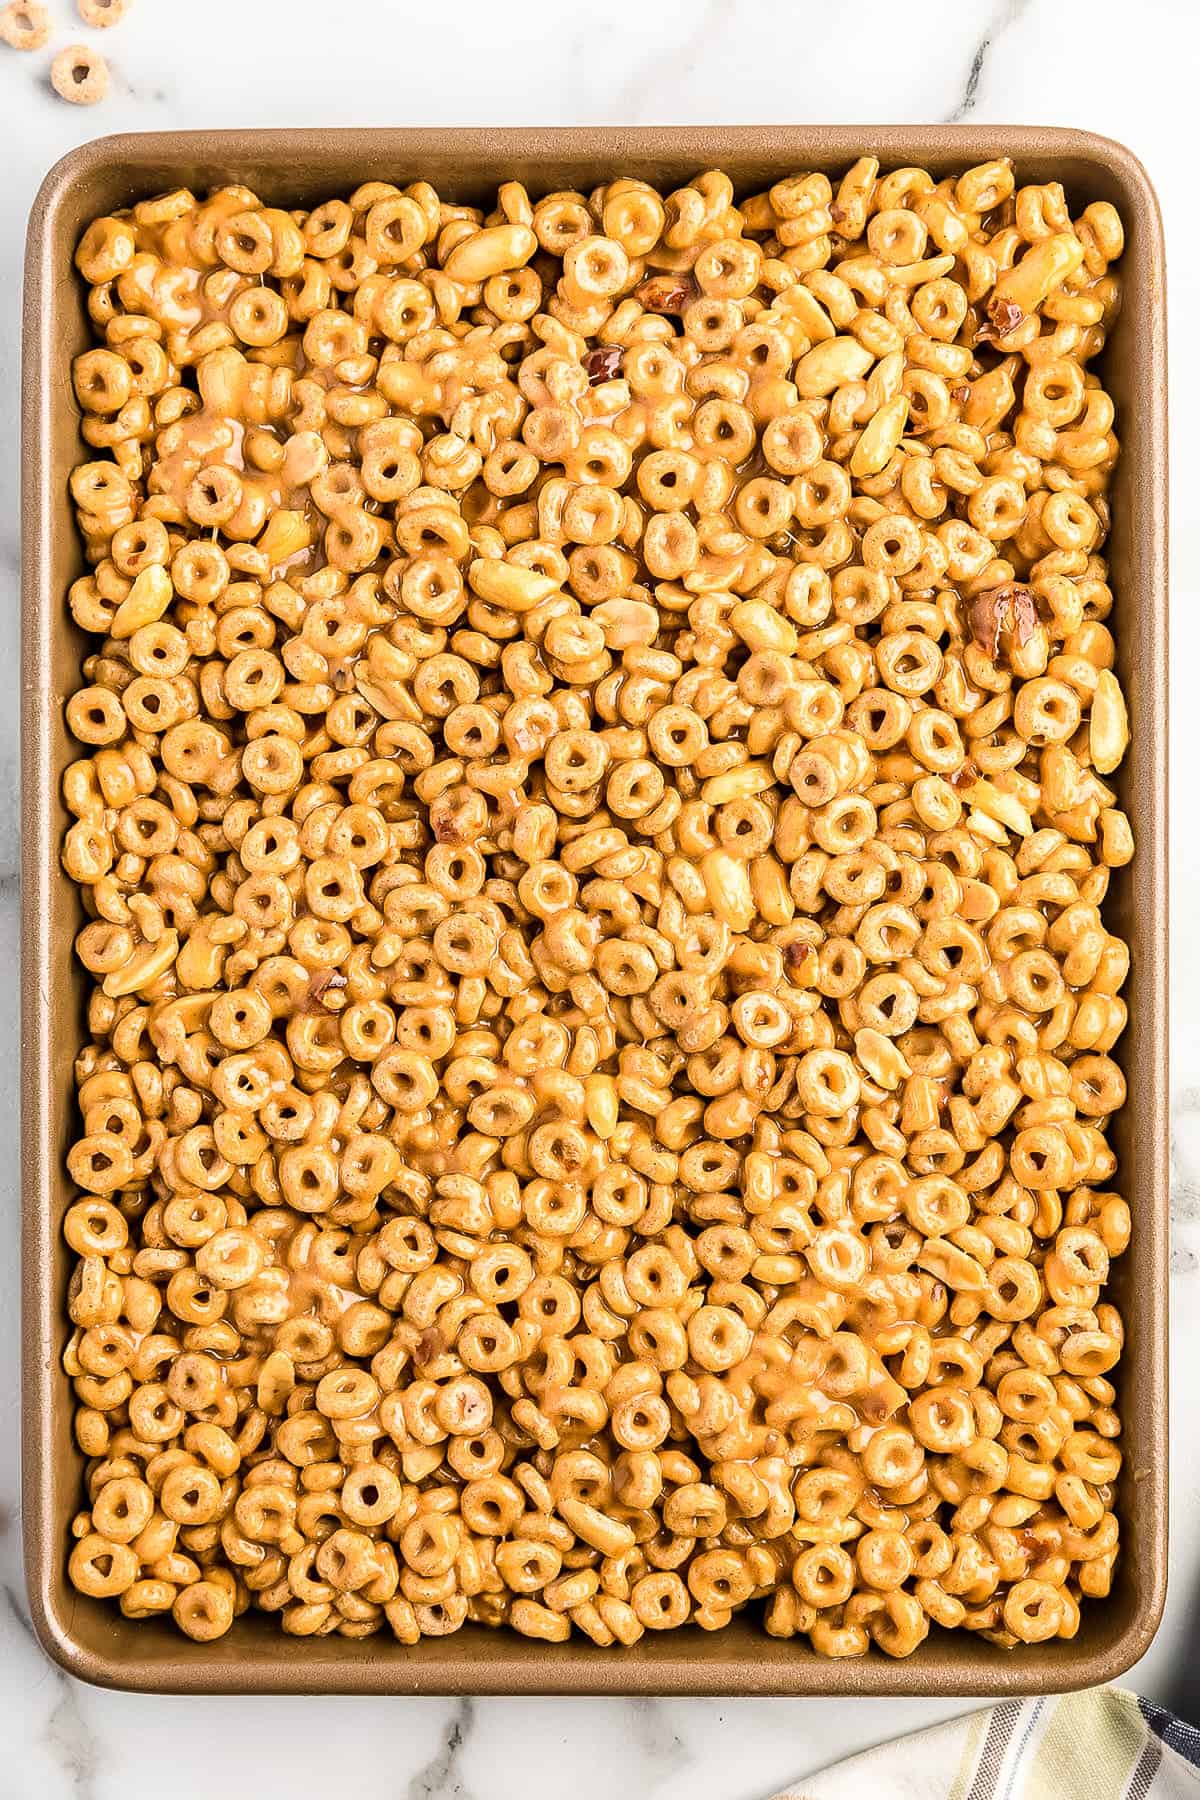 Overhead image of a pan of Peanut Butter Cheerio Bars